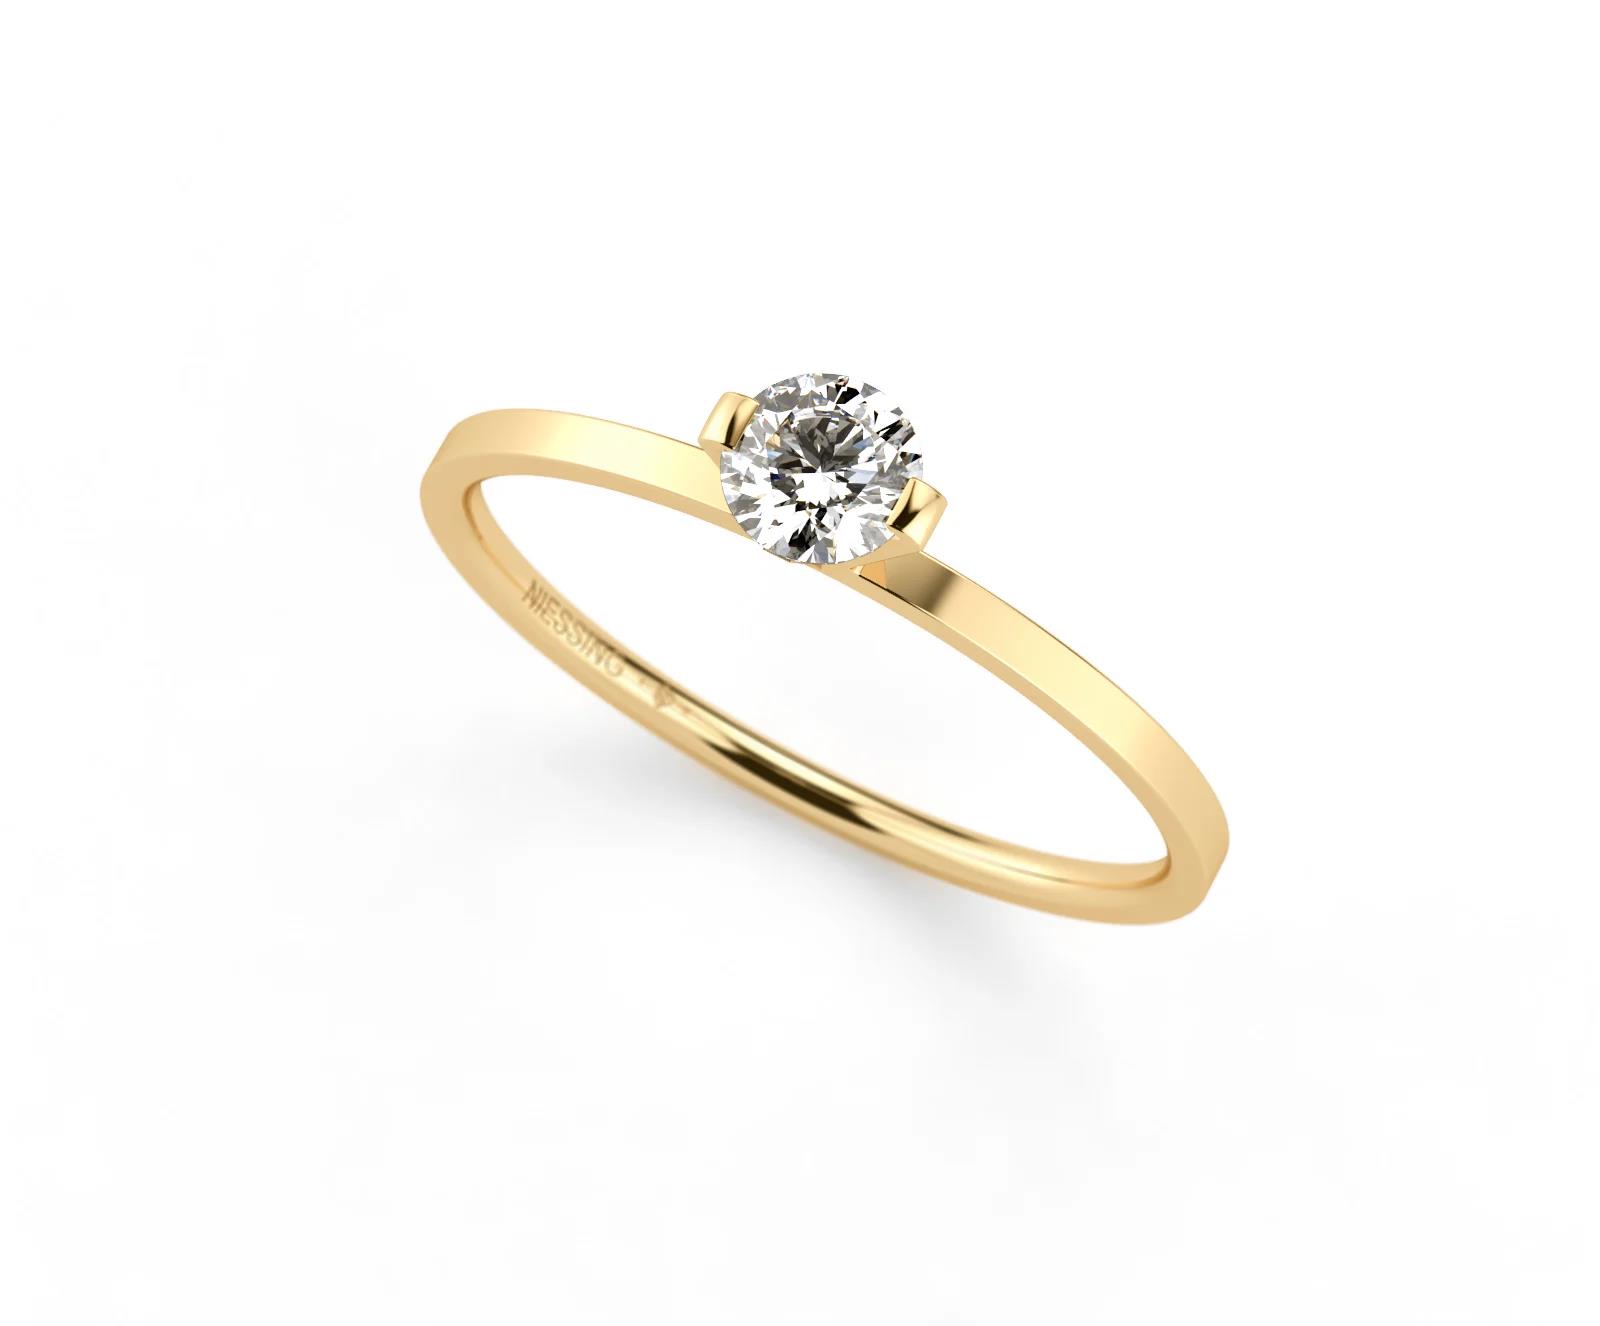 Niessing Princess Solitaire Ring